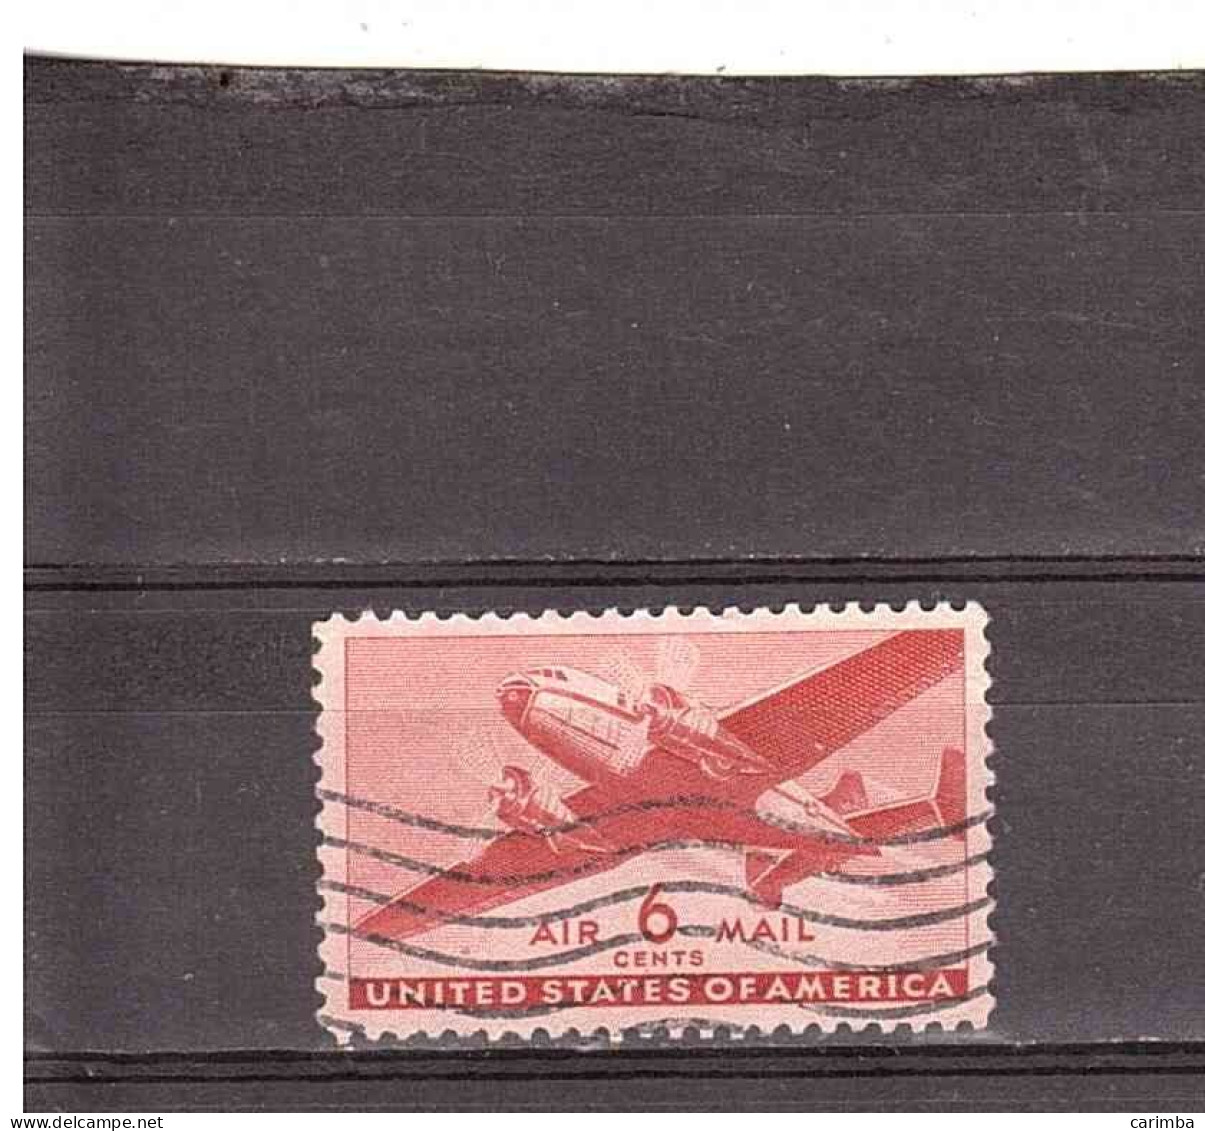 AIR MAIL 6 CENTS - 2a. 1941-1960 Afgestempeld